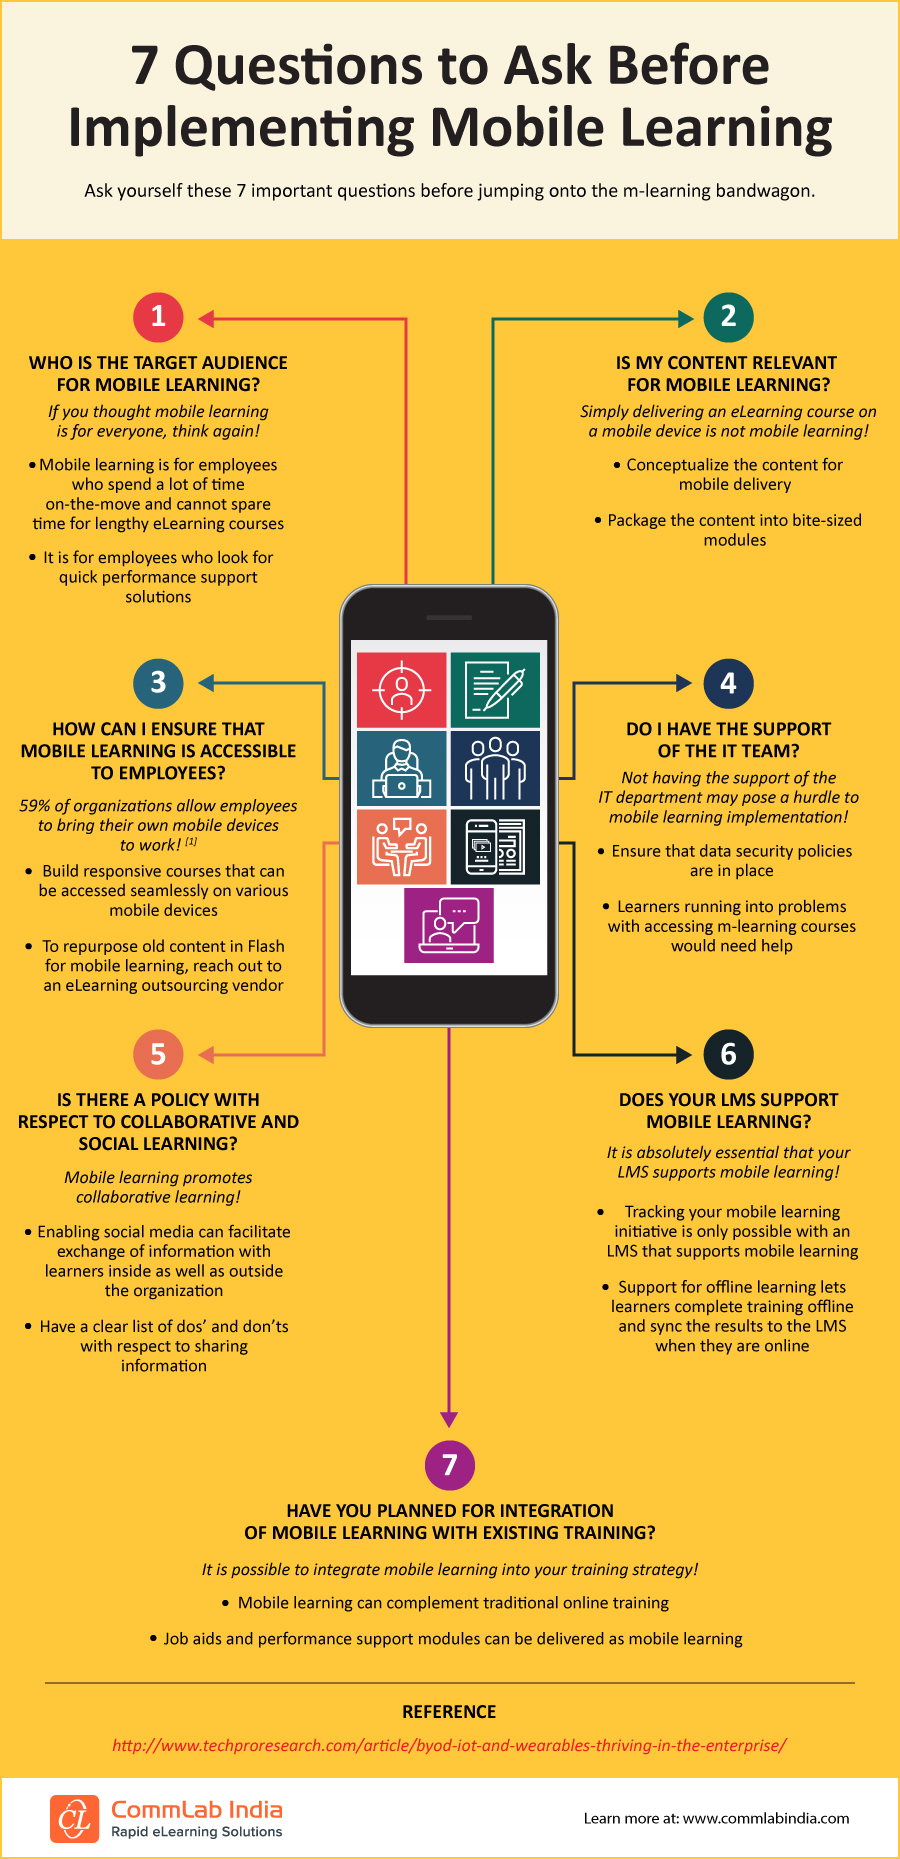 7 Questions to Ask Before Implementing Mobile Learning [Infographic]